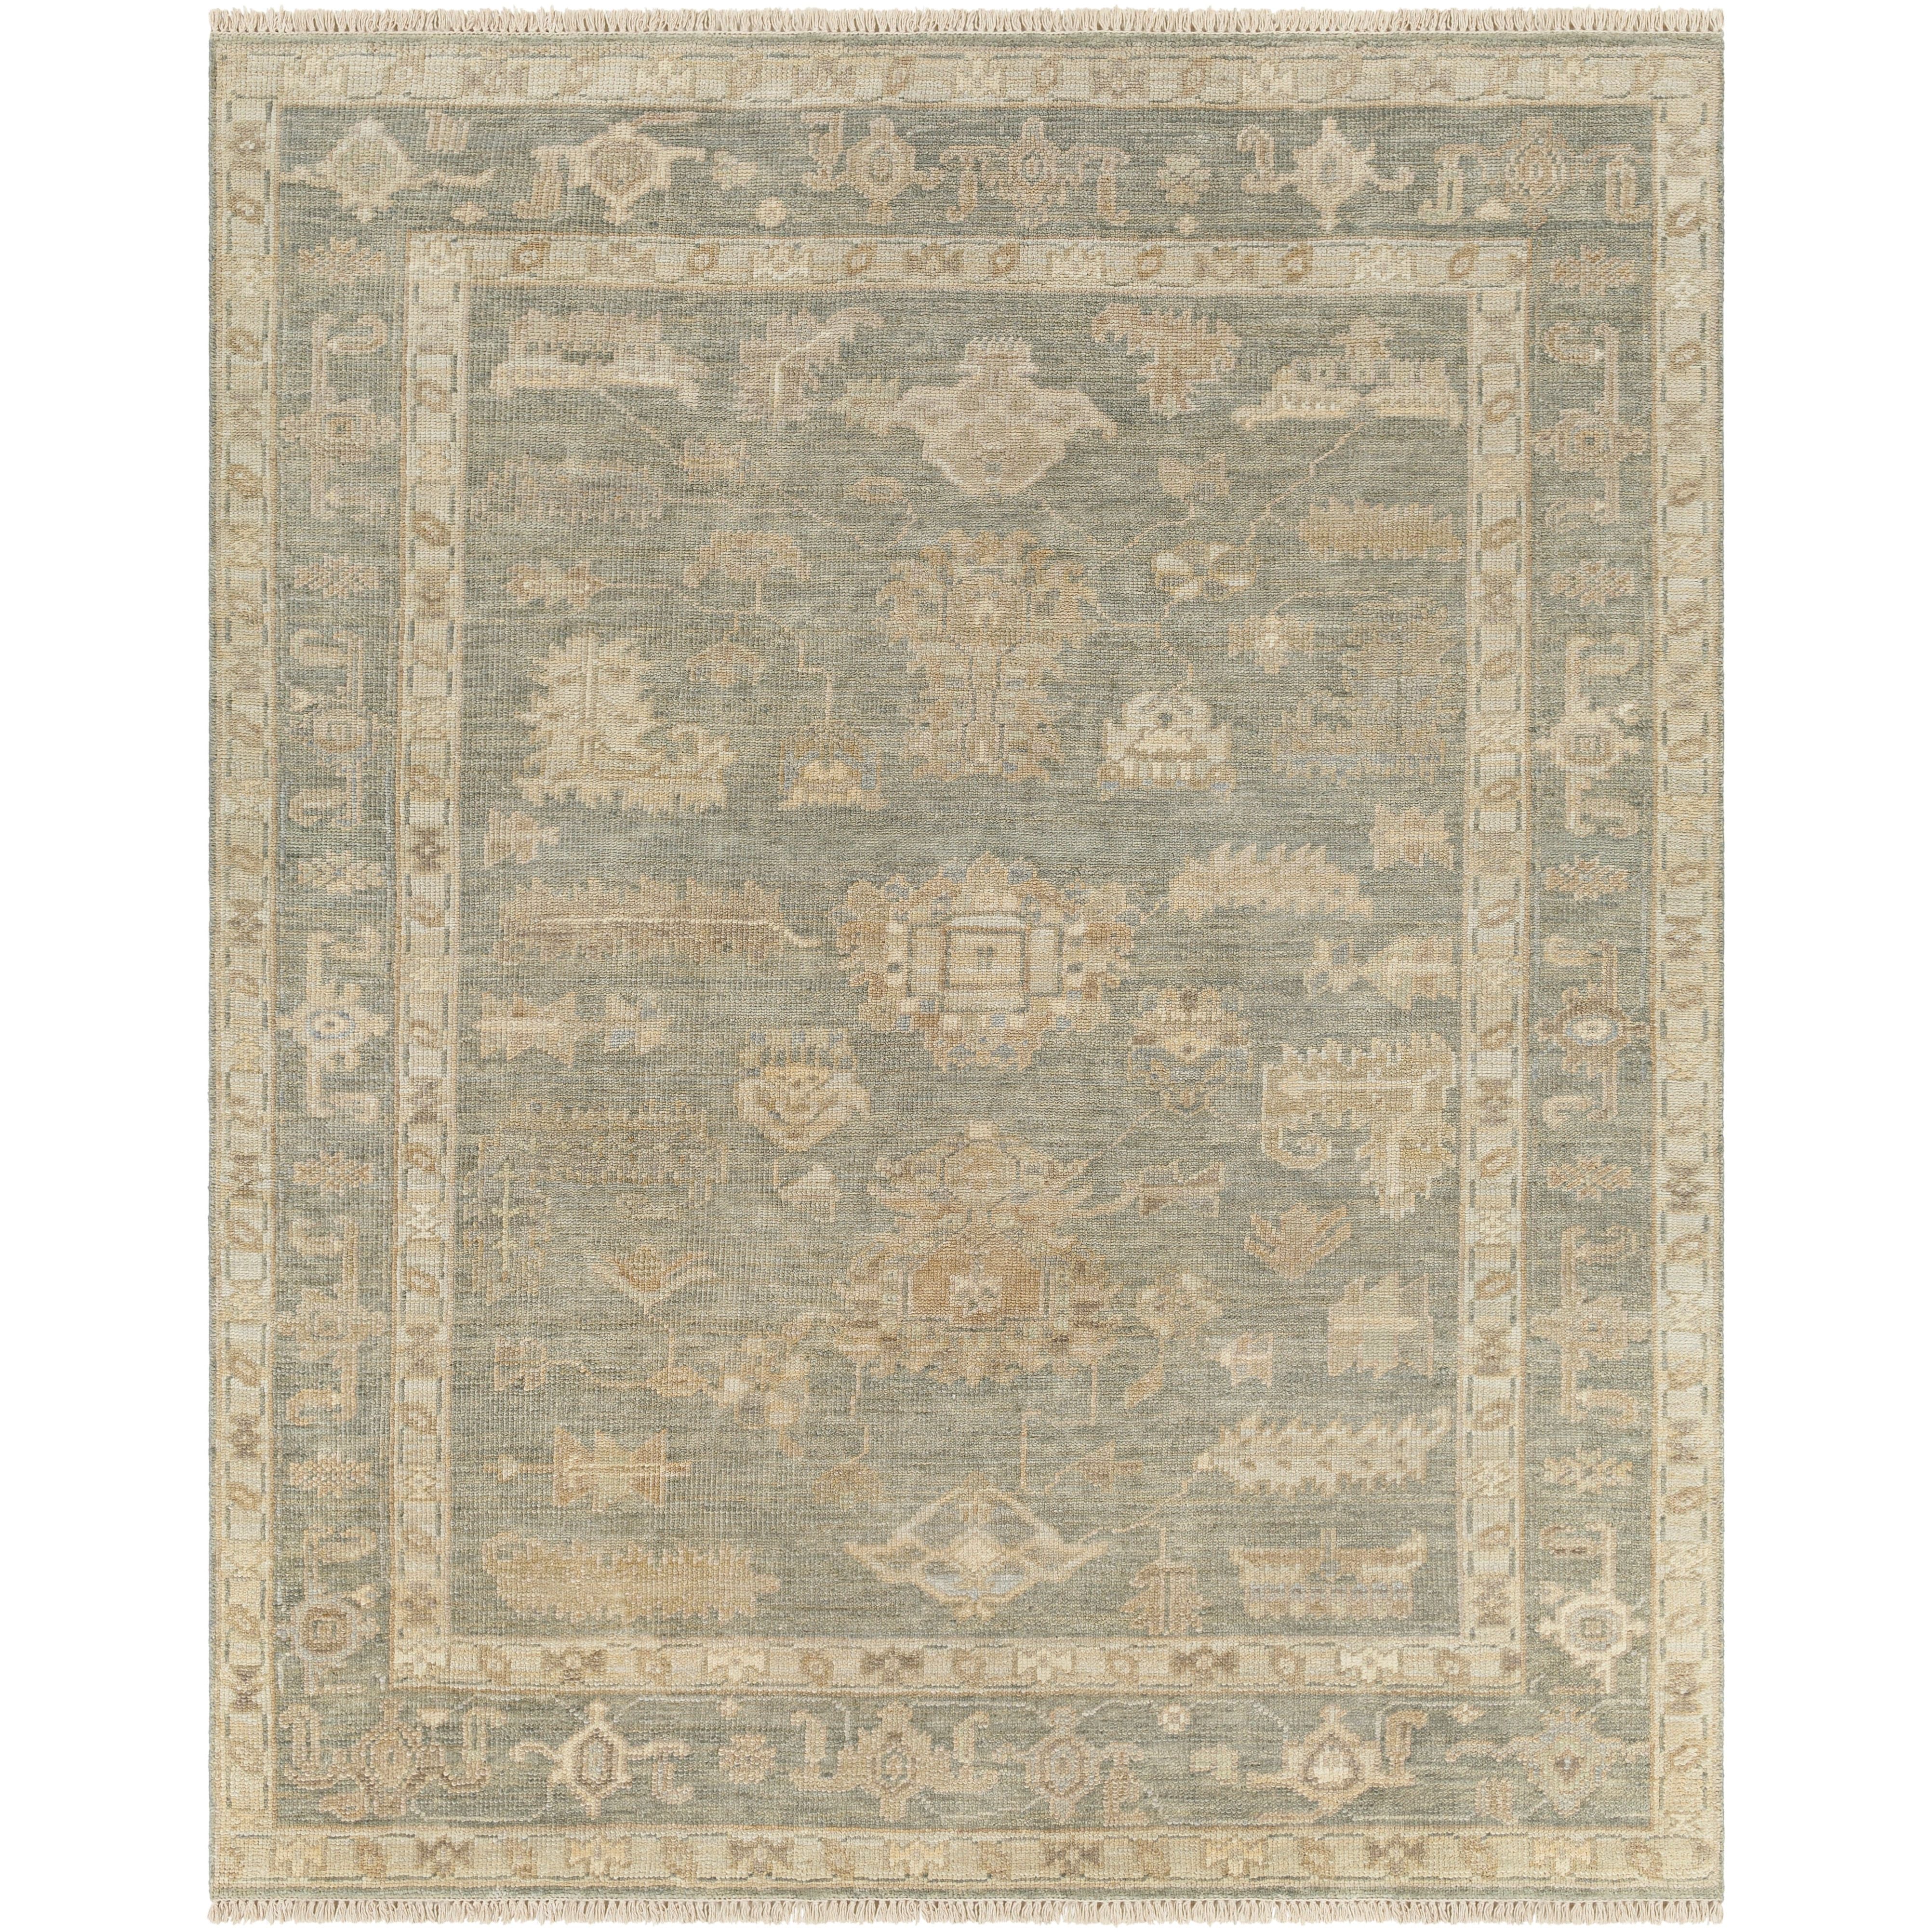 The Antalya Stone hand-knotted rug showcases traditional inspired designs that exemplify timeless styles of elegance, comfort, and sophistication. Amethyst Home provides interior design, new construction, custom furniture, and area rugs in the Kansas City metro area.